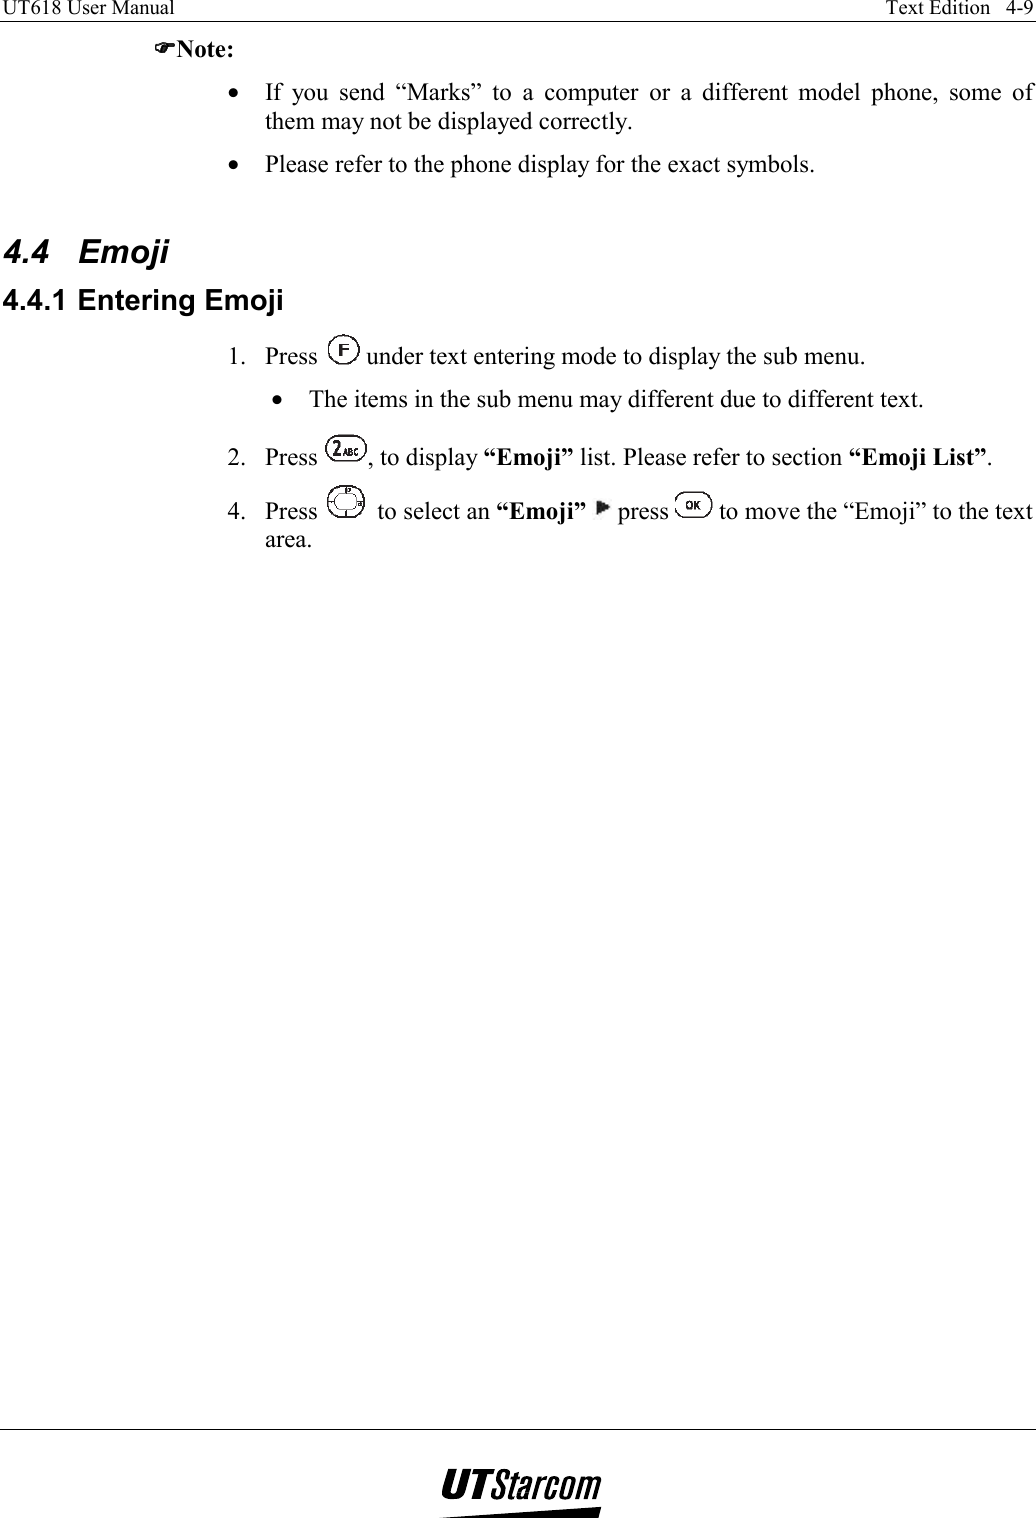 UT618 User Manual    Text Edition   4-9   ))))Note: •  If you send “Marks” to a computer or a different model phone, some of them may not be displayed correctly. •  Please refer to the phone display for the exact symbols.  4.4 Emoji 4.4.1 Entering Emoji 1. Press   under text entering mode to display the sub menu. •  The items in the sub menu may different due to different text. 2. Press  , to display “Emoji” list. Please refer to section “Emoji List”. 4. Press   to select an “Emoji”  press   to move the “Emoji” to the text area. 